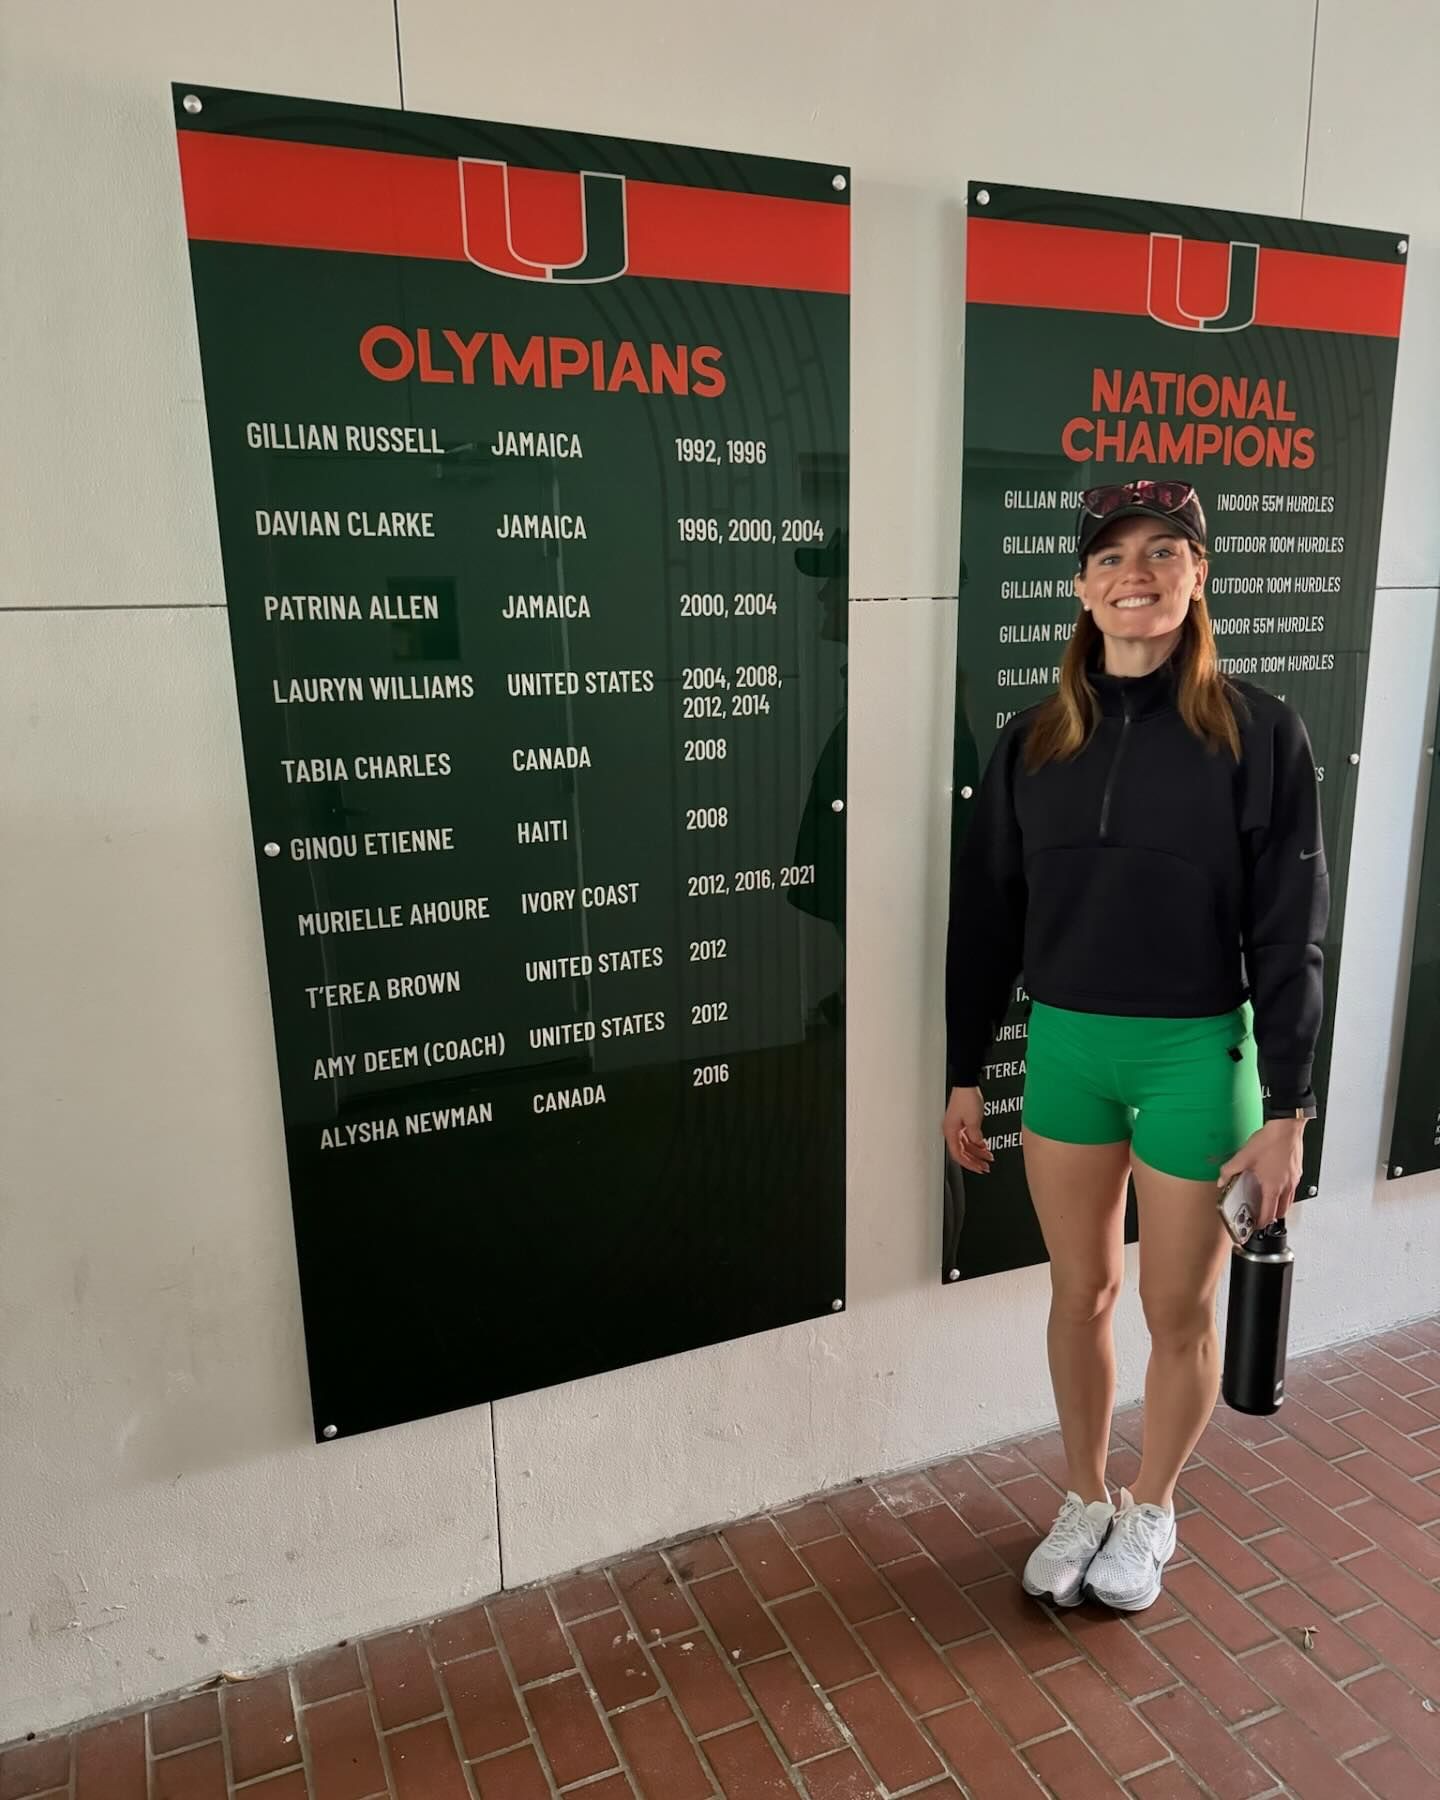 So surreal training back at UM - this time with my name on the board💚🧡 Fun Fact: University of Miami is where I went to university!🤓
Vibes are high down south⚡️